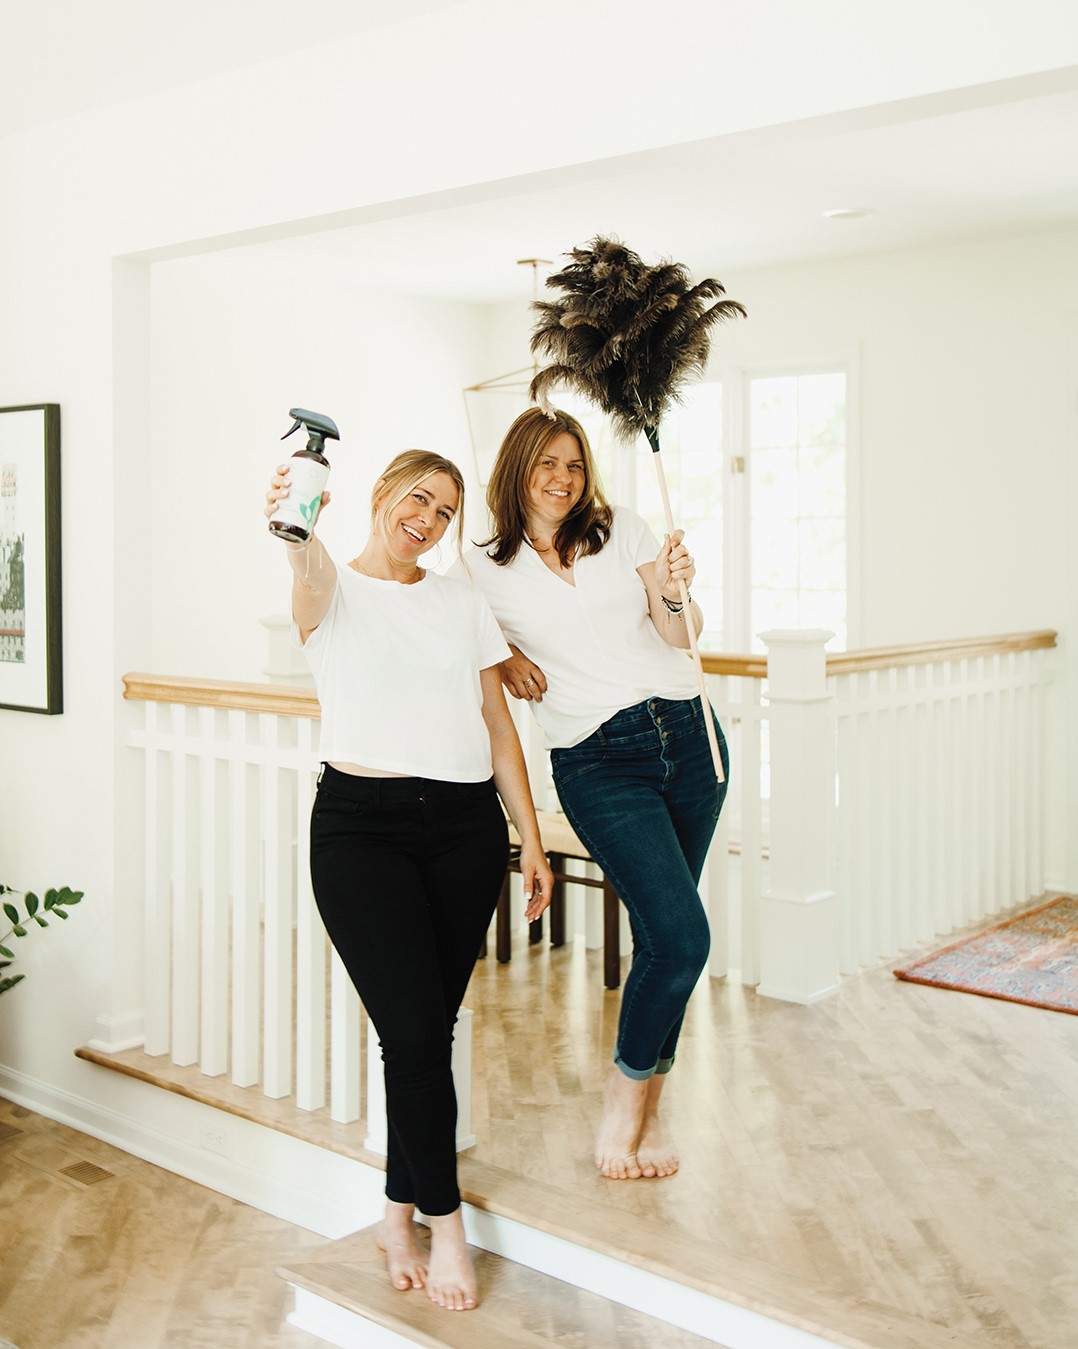 Clean Nest Homes co-owners Katie Lother and Angela Ducklinsky.